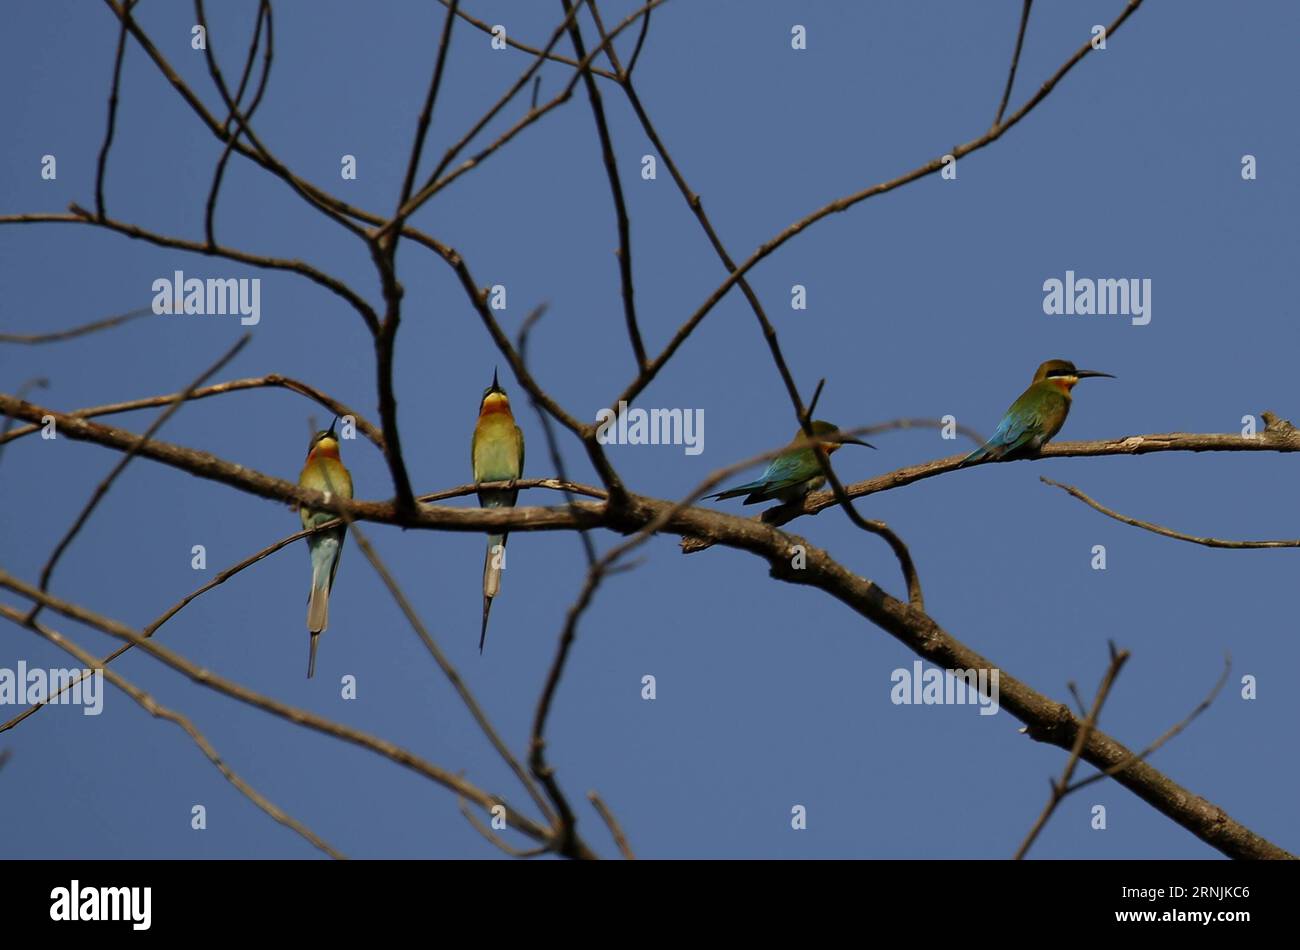 (170202) -- BAGO, Feb. 2, 2017 -- Little green bee-eaters stand on a branch at the Moeyungyi Wetland Wildlife Sanctuary in Bago region, Myanmar, Feb. 2, 2017. Moeyungyi Wetlands is situated in Bago Division. Every year, millions of birds usually fly from the northern hemisphere to the south along the East-Asian Australian Flyway. )(gl) MYANMAR-BAGO-MOEYUNGYI WETLAND-WILDLIFE UxAung PUBLICATIONxNOTxINxCHN   Bago Feb 2 2017 Little Green Bee Eaters stand ON a Branch AT The Moeyungyi Wetland Wildlife Sanctuary in Bago Region Myanmar Feb 2 2017 Moeyungyi Wetlands IS Situated in Bago Division Every Stock Photo